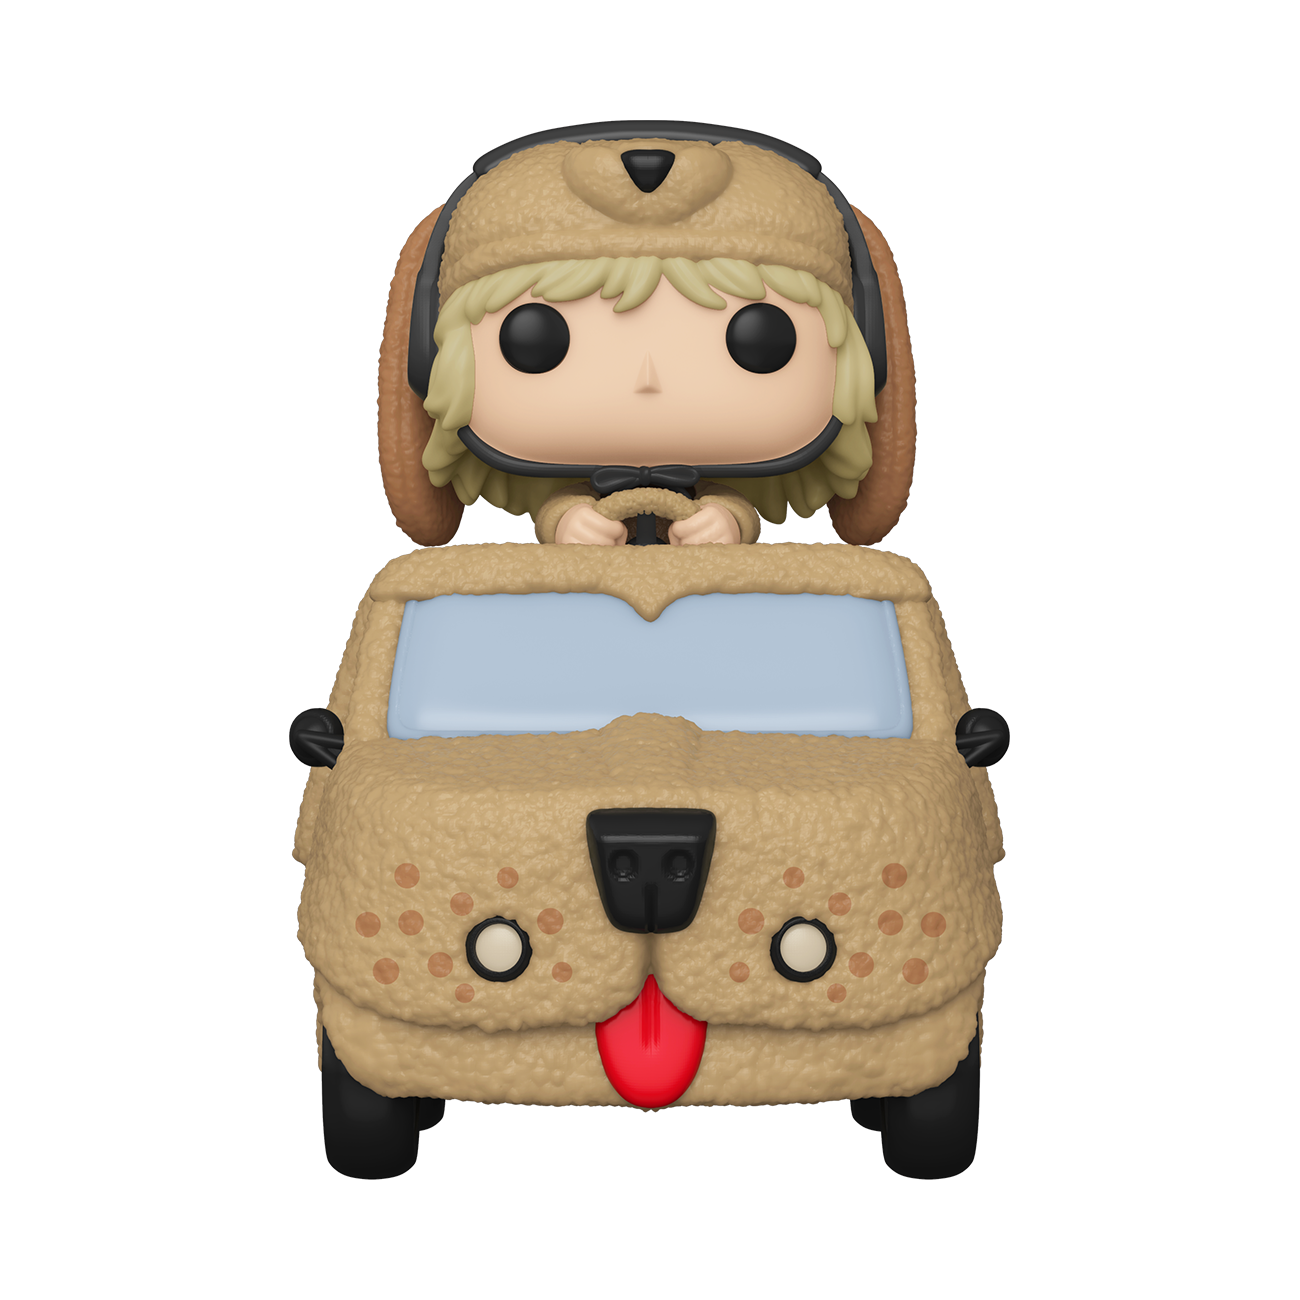 POP! Rides: Dumb and Dumber - Harry Dunne in Mutt Cutts Van